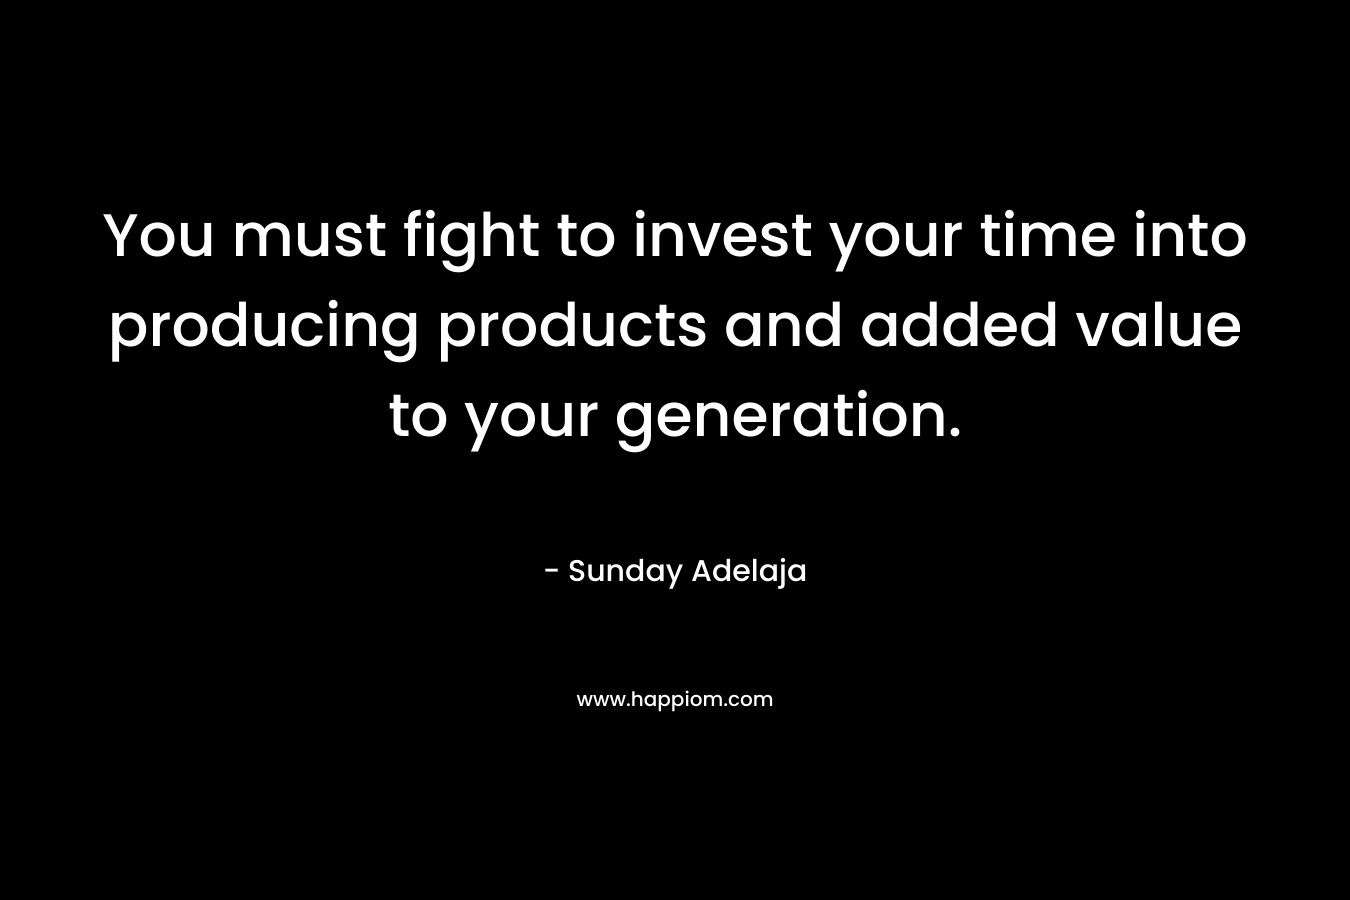 You must fight to invest your time into producing products and added value to your generation.